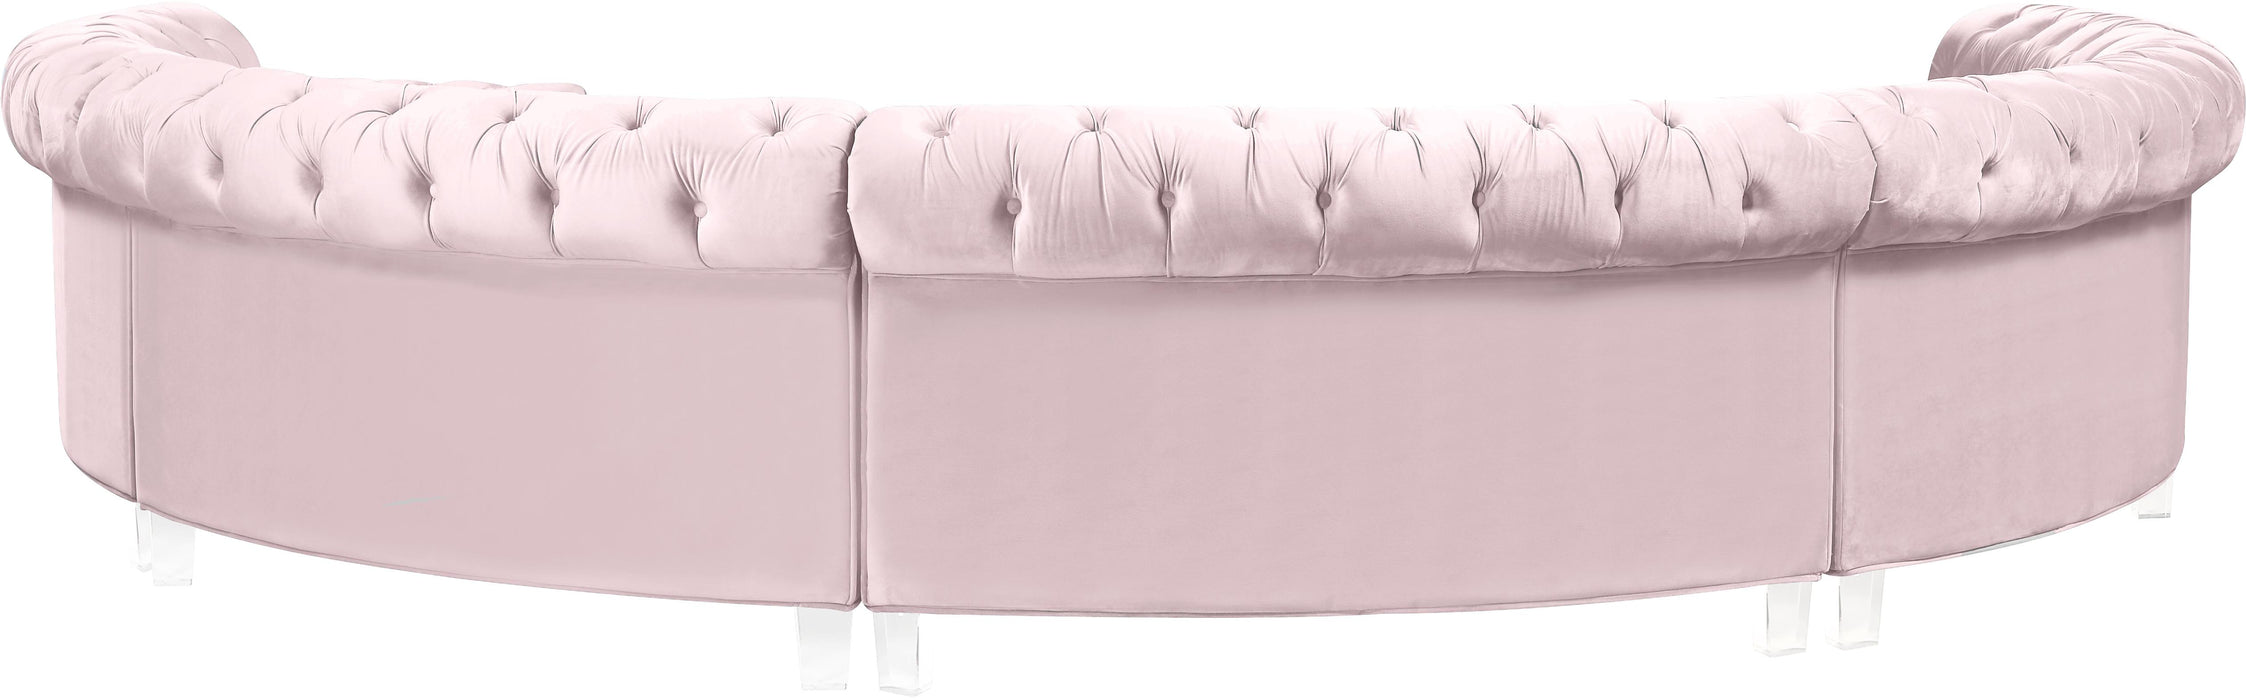 Anabella Pink Velvet 5pc. Sectional